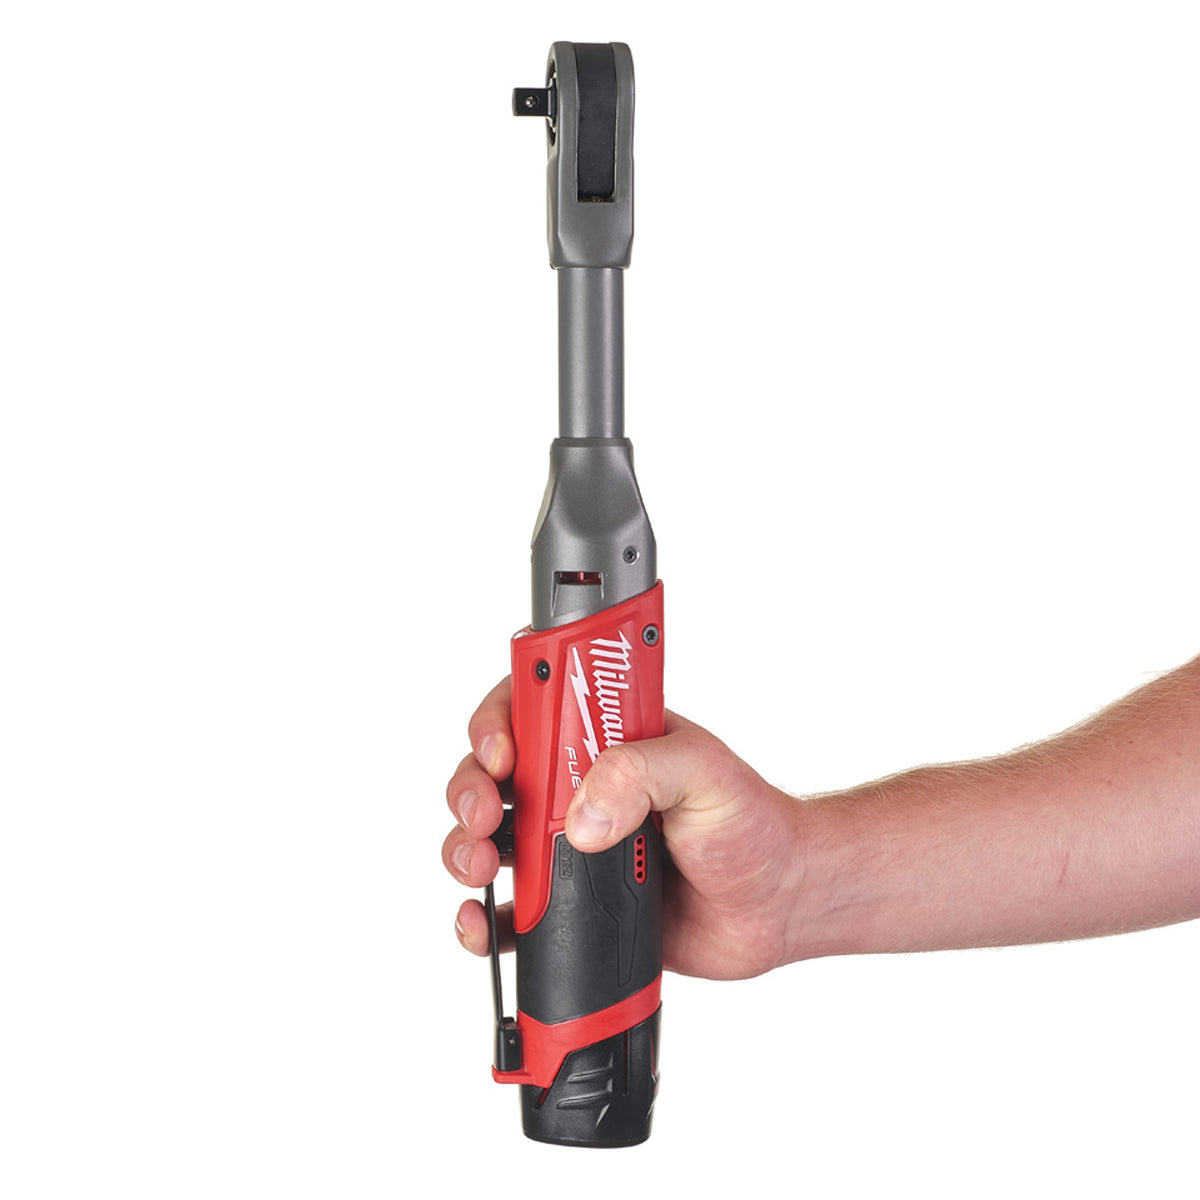 Milwaukee M12FIR38LR-0 12V FUEL Brushless Long Reach 3/8in Ratchet with 2 x 2.0Ah Batteries & Charger in Bag